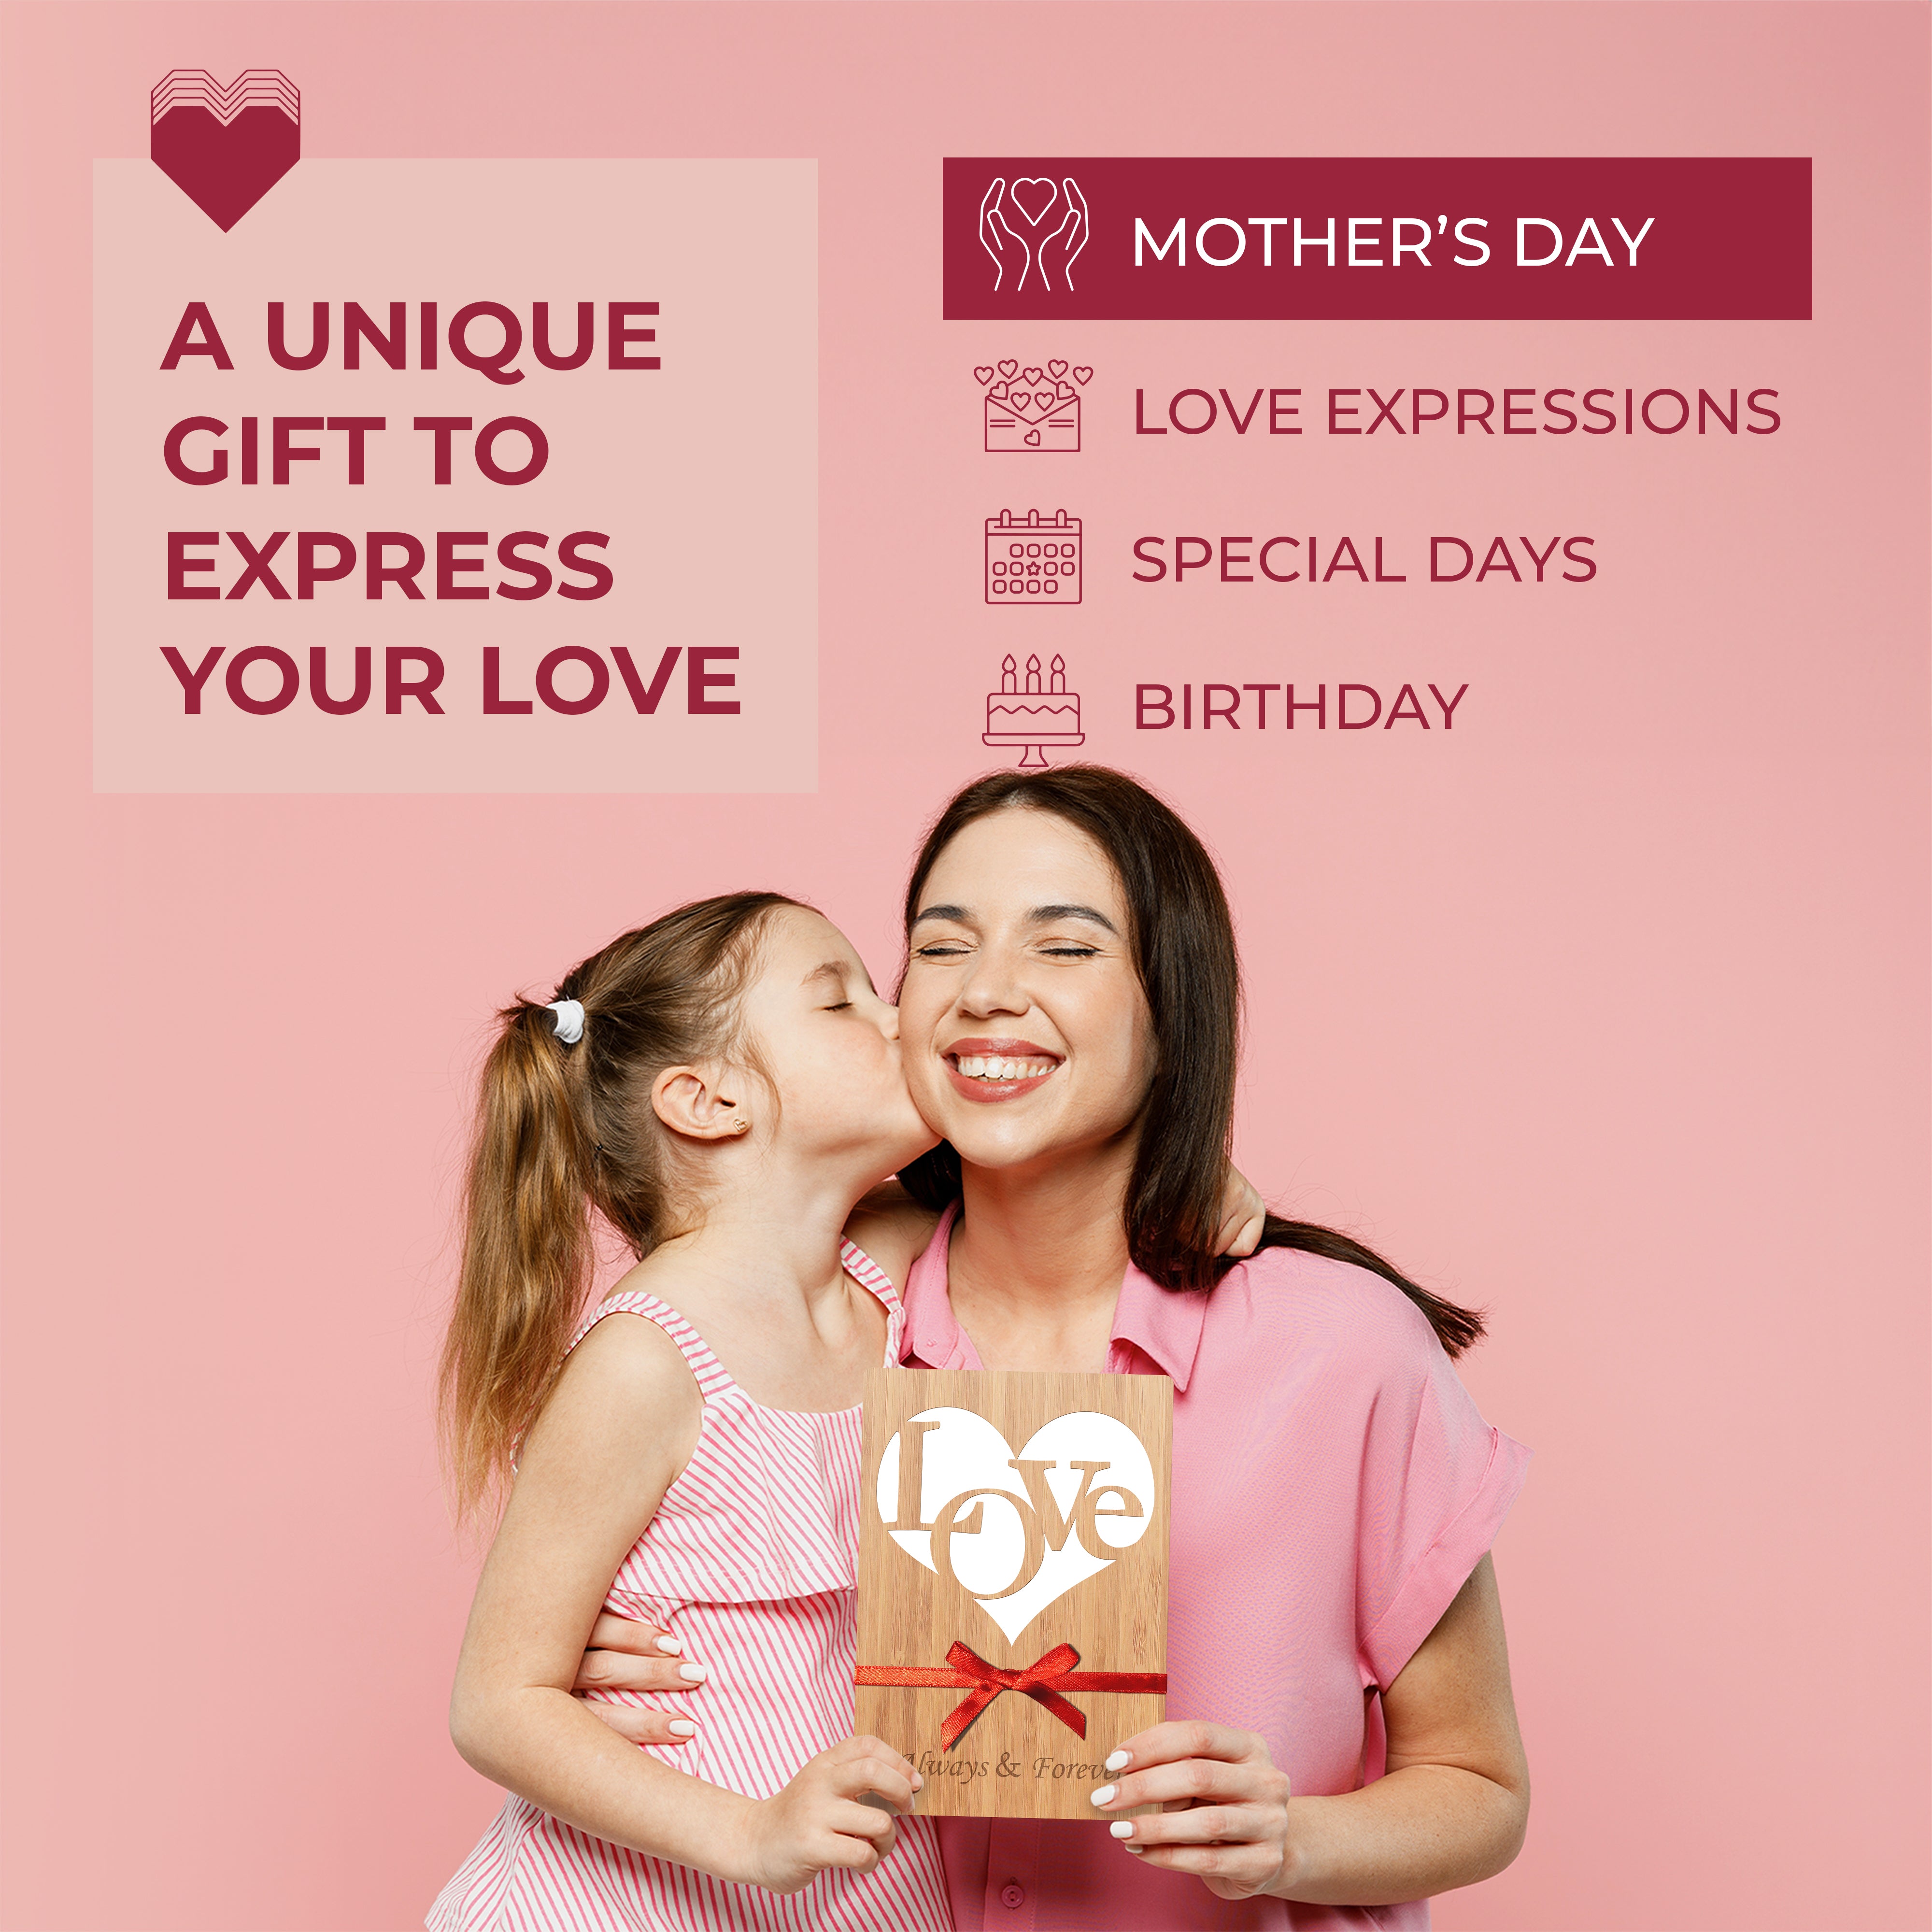 Handcrafted Bamboo Mother's Day Cards - Love in Heart